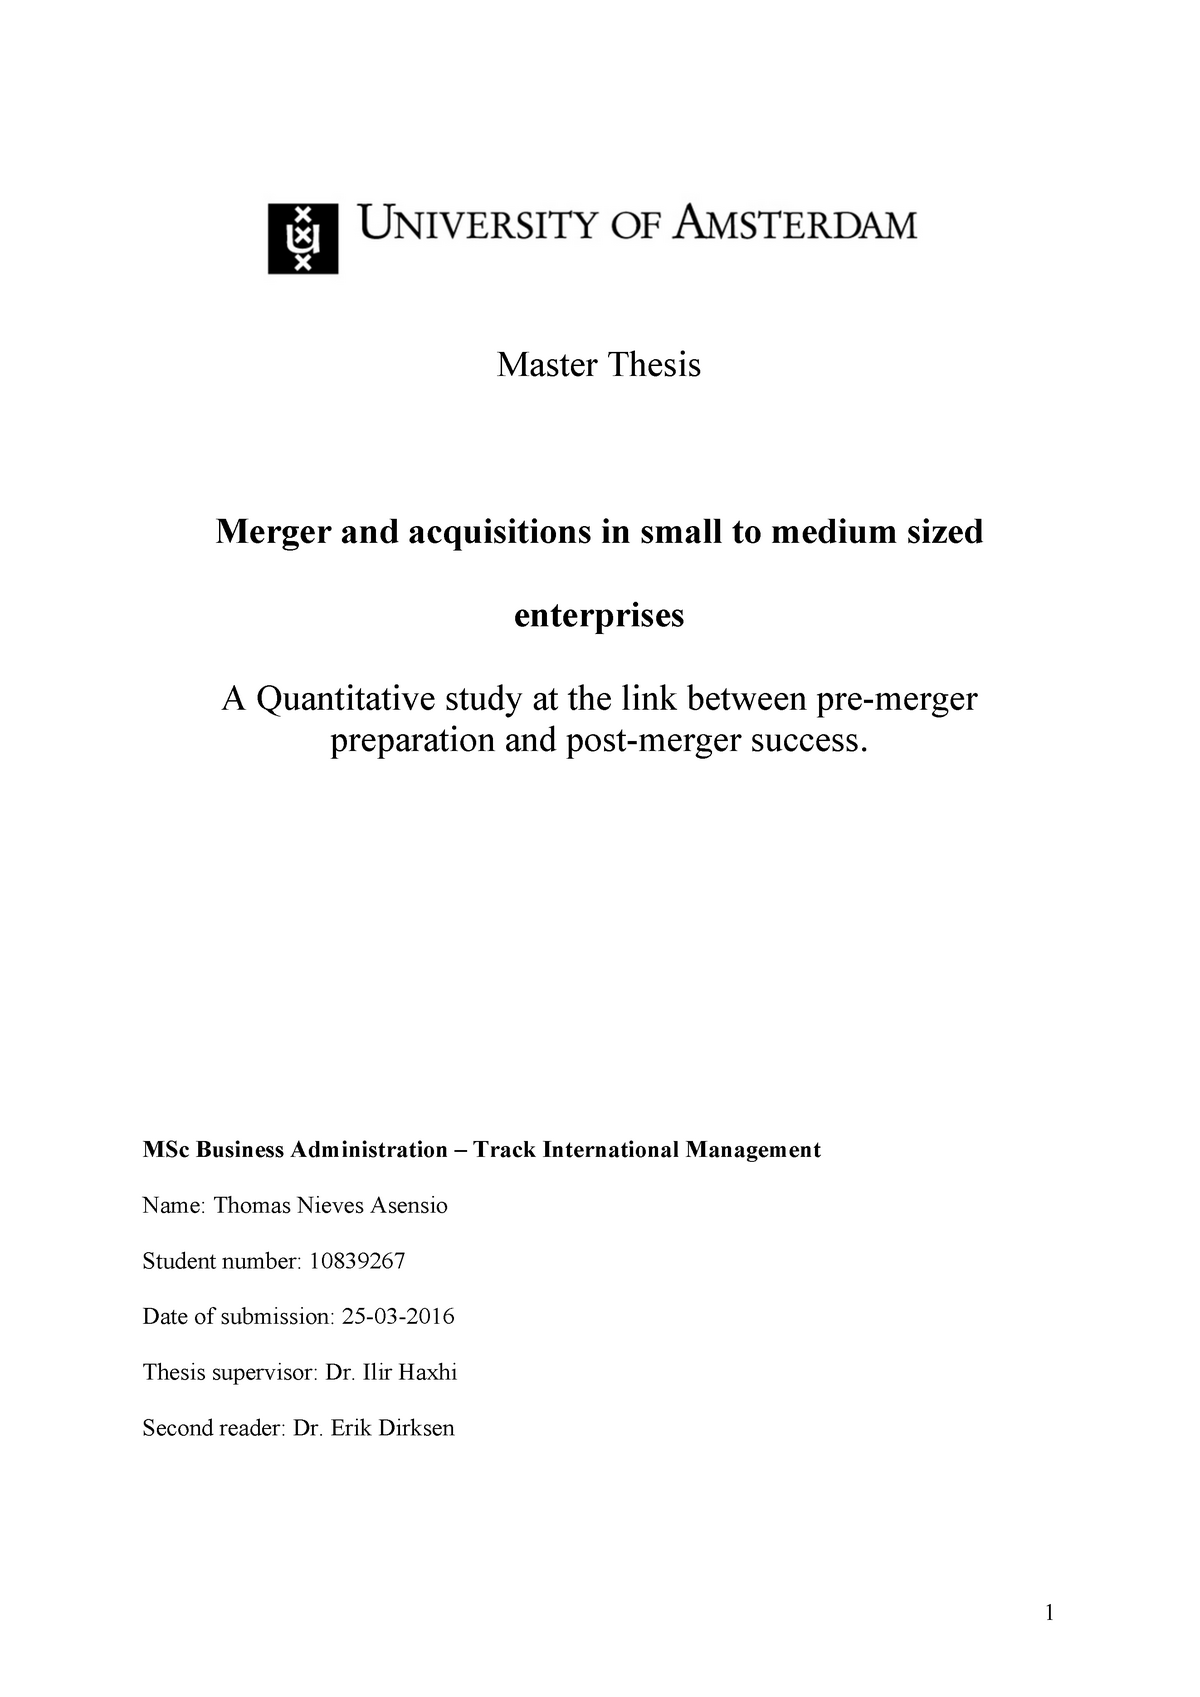 merger and acquisition master thesis